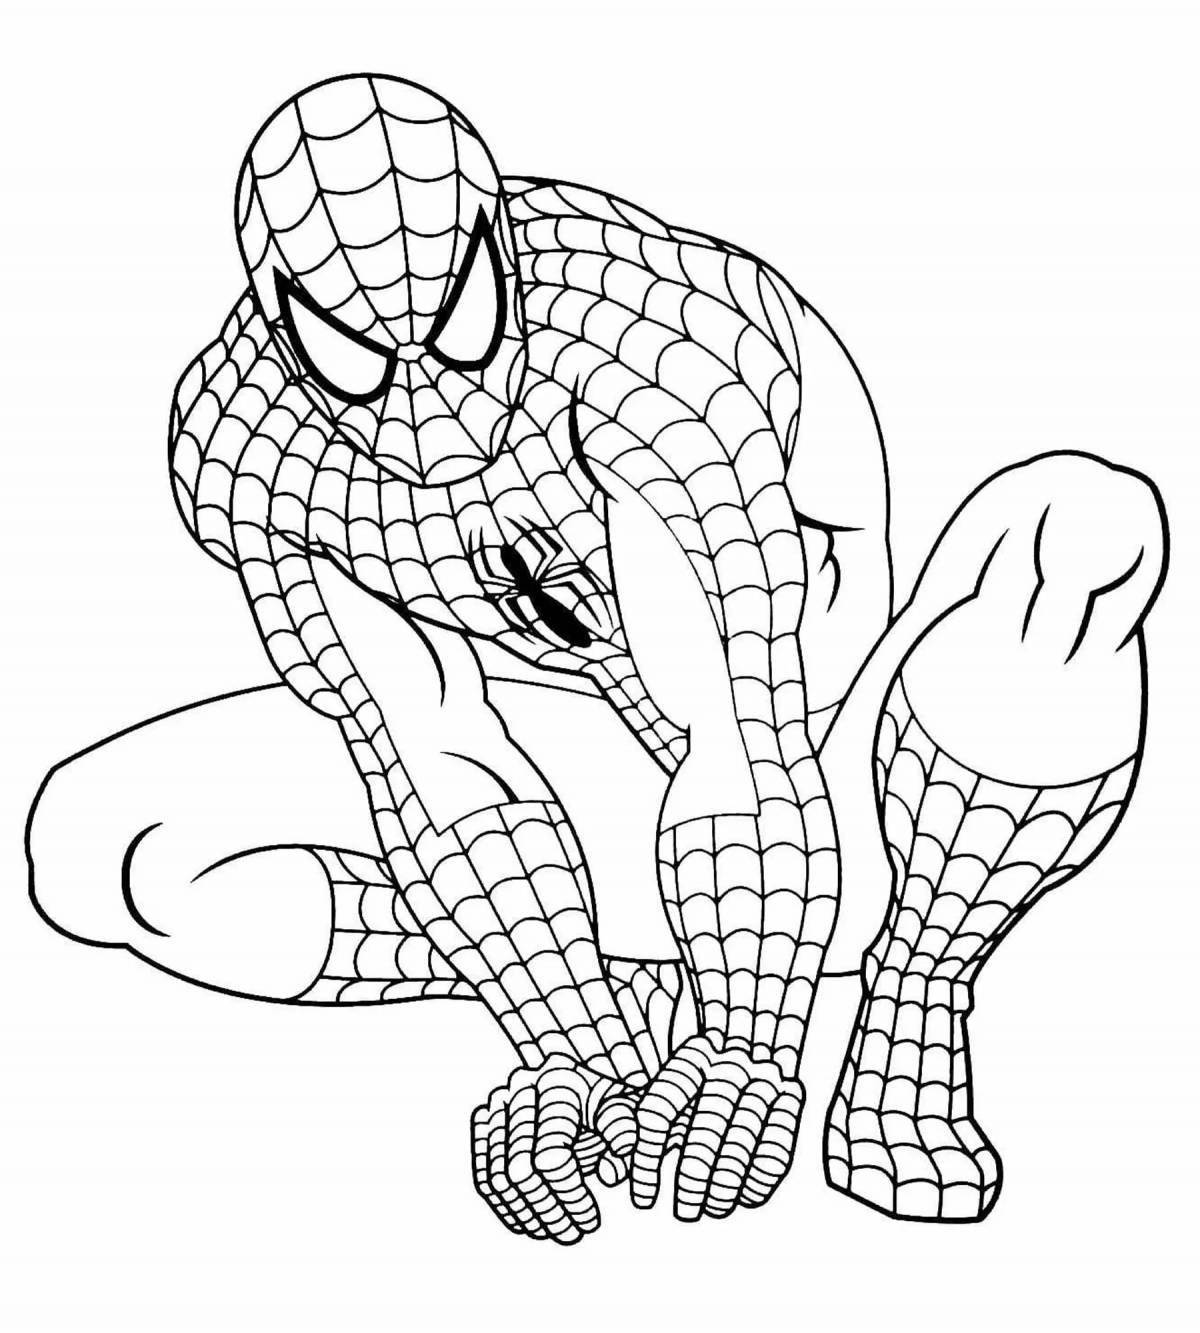 Colorful spider-man coloring page